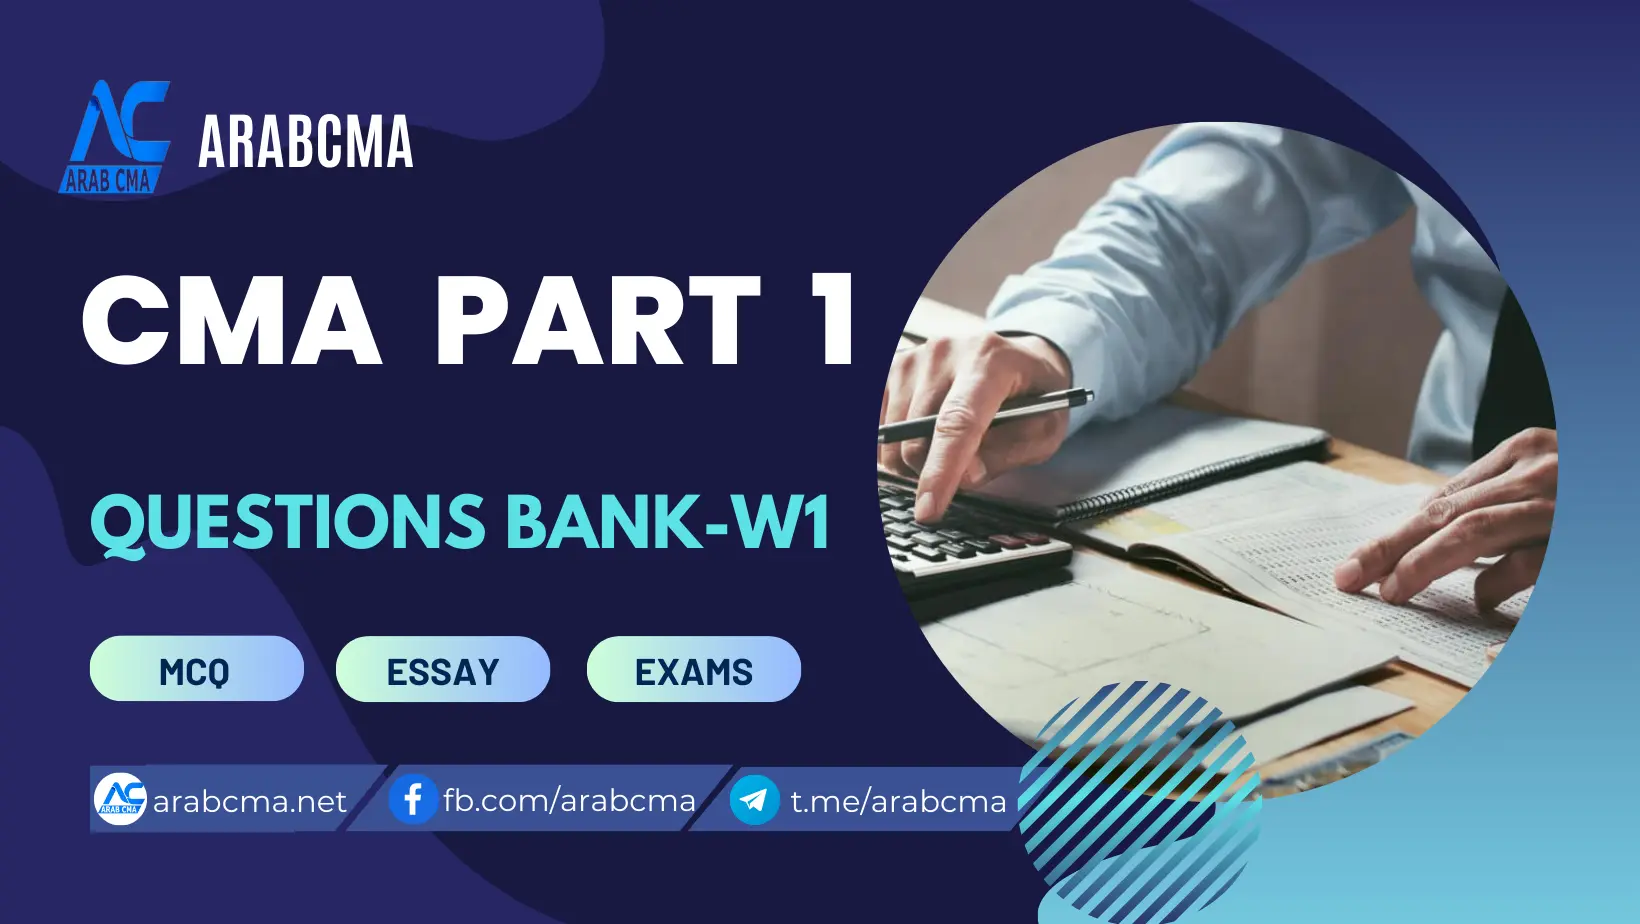 CMA PART 1 – WLY QUESTIONS BANK